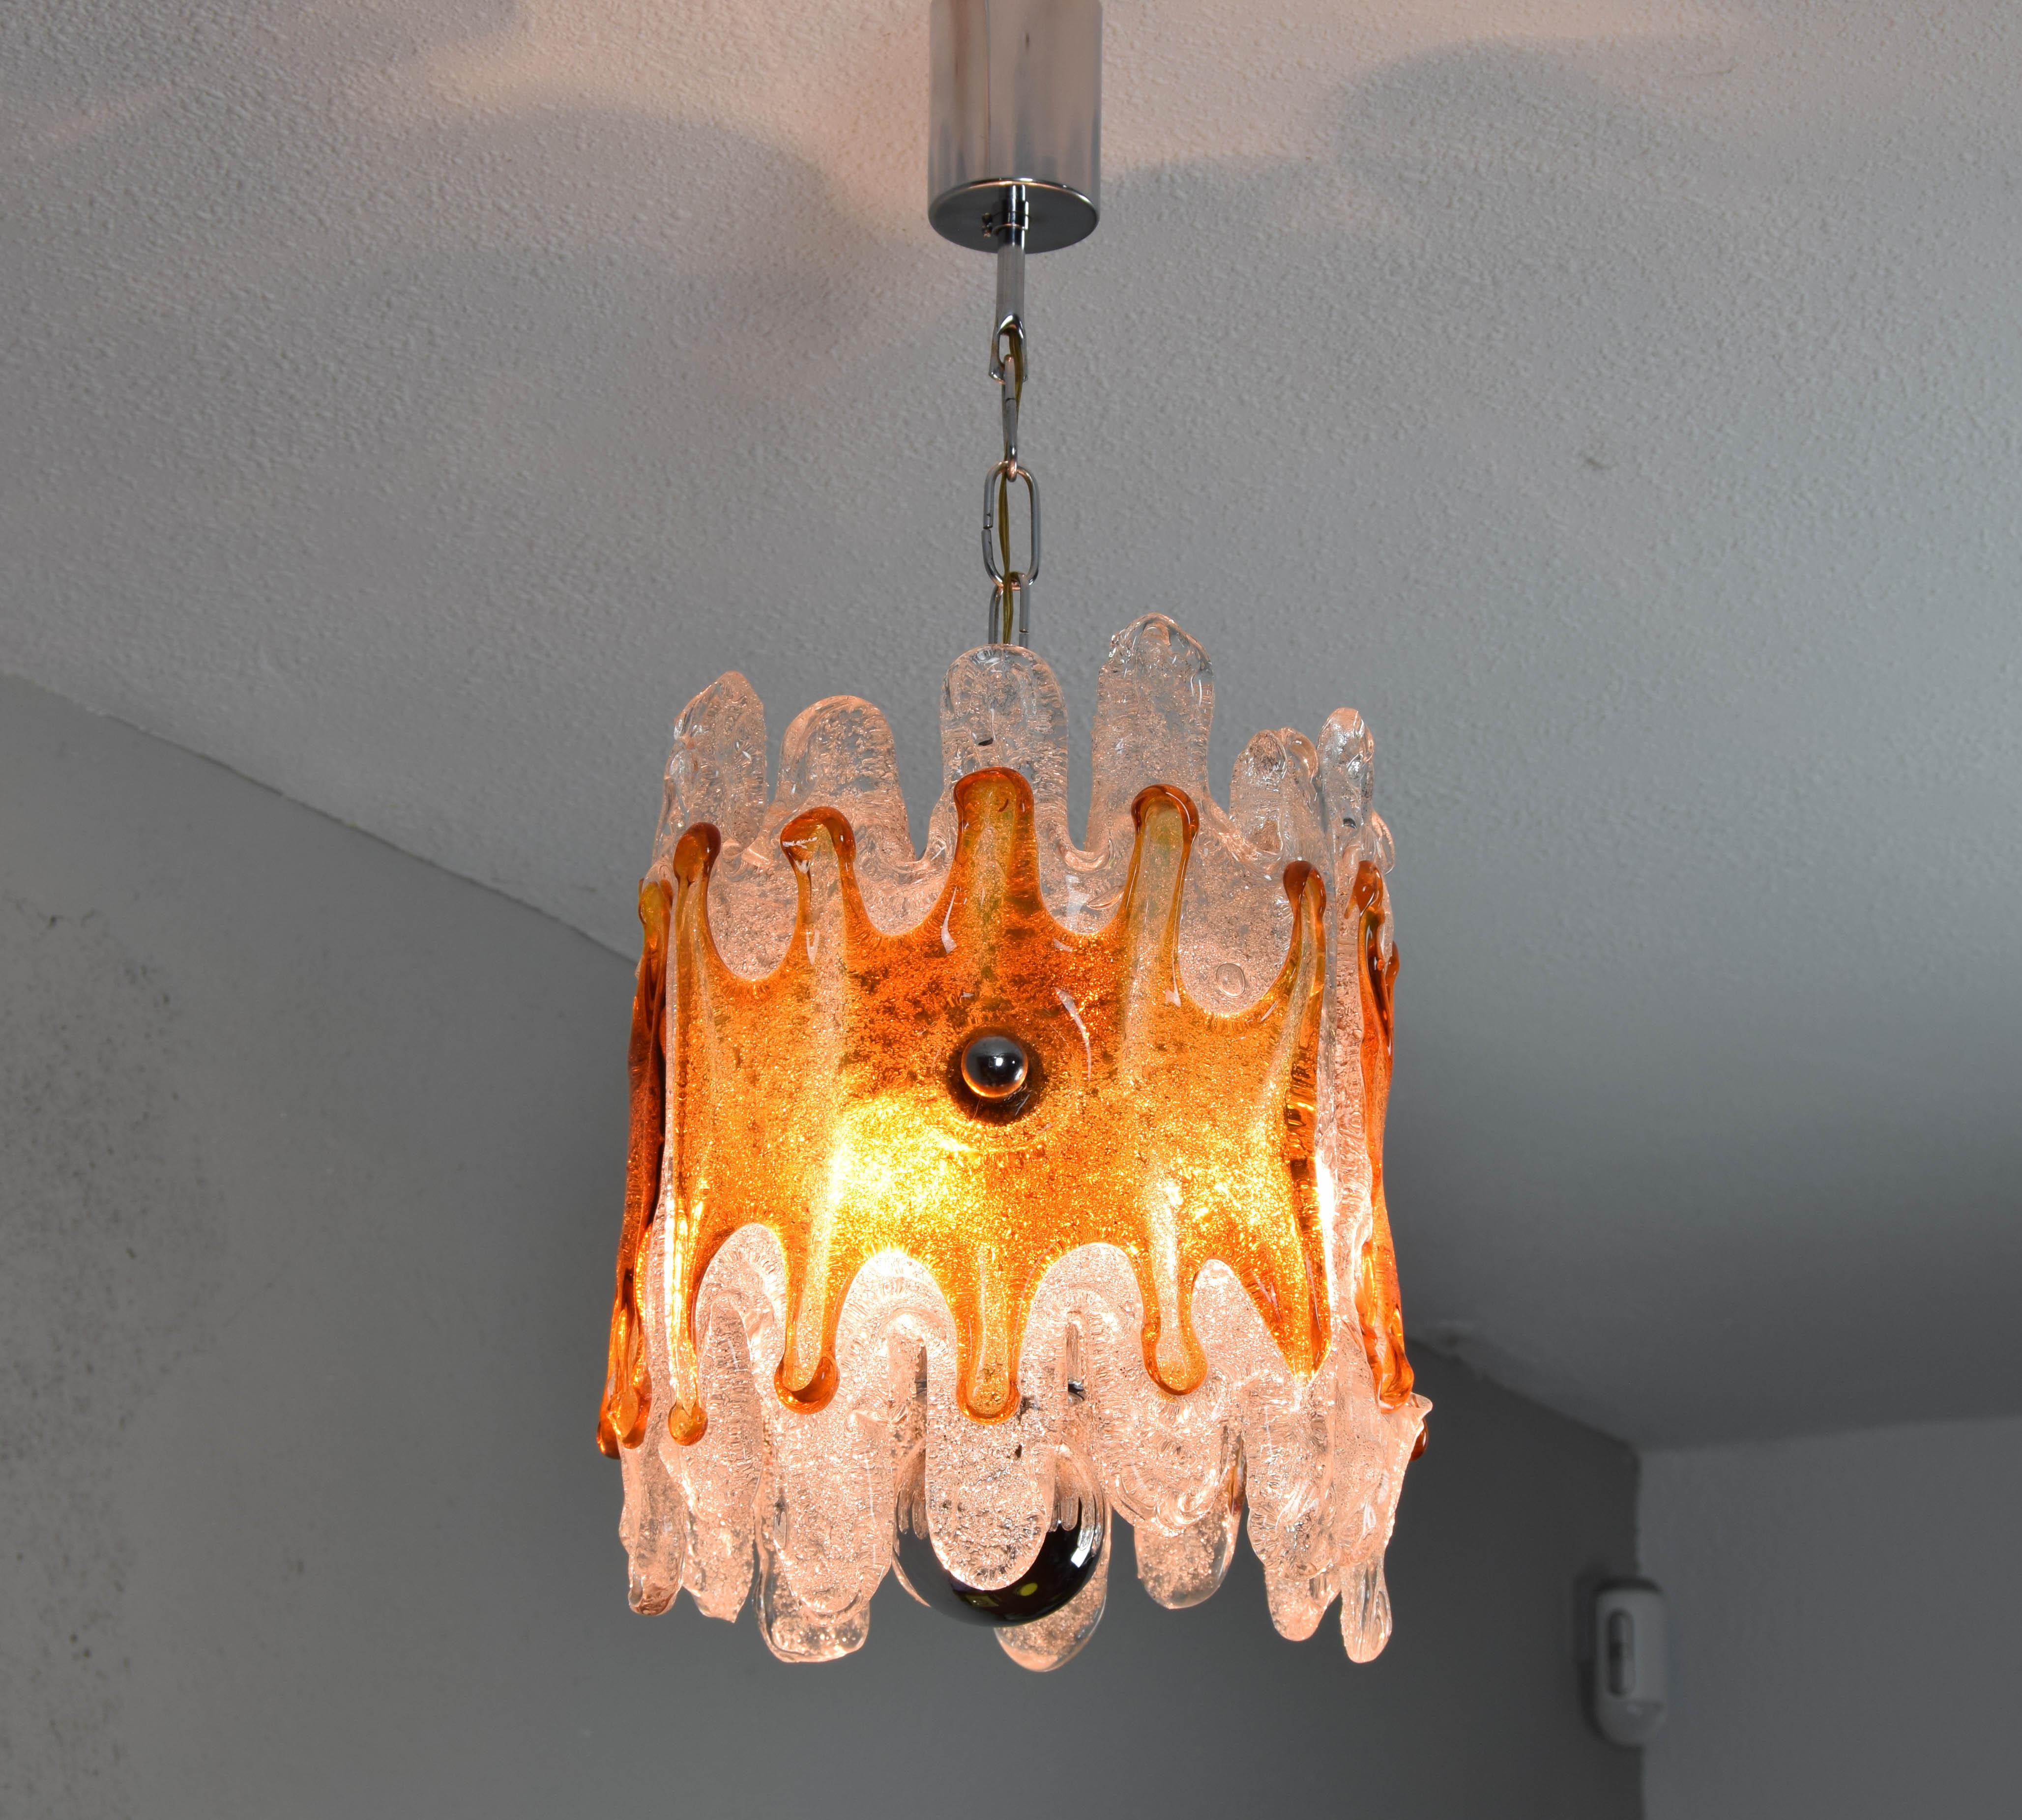 Midcentury Italian Modern Mazzega Amber and Clear Lava Murano Chandelier, 1960s For Sale 3